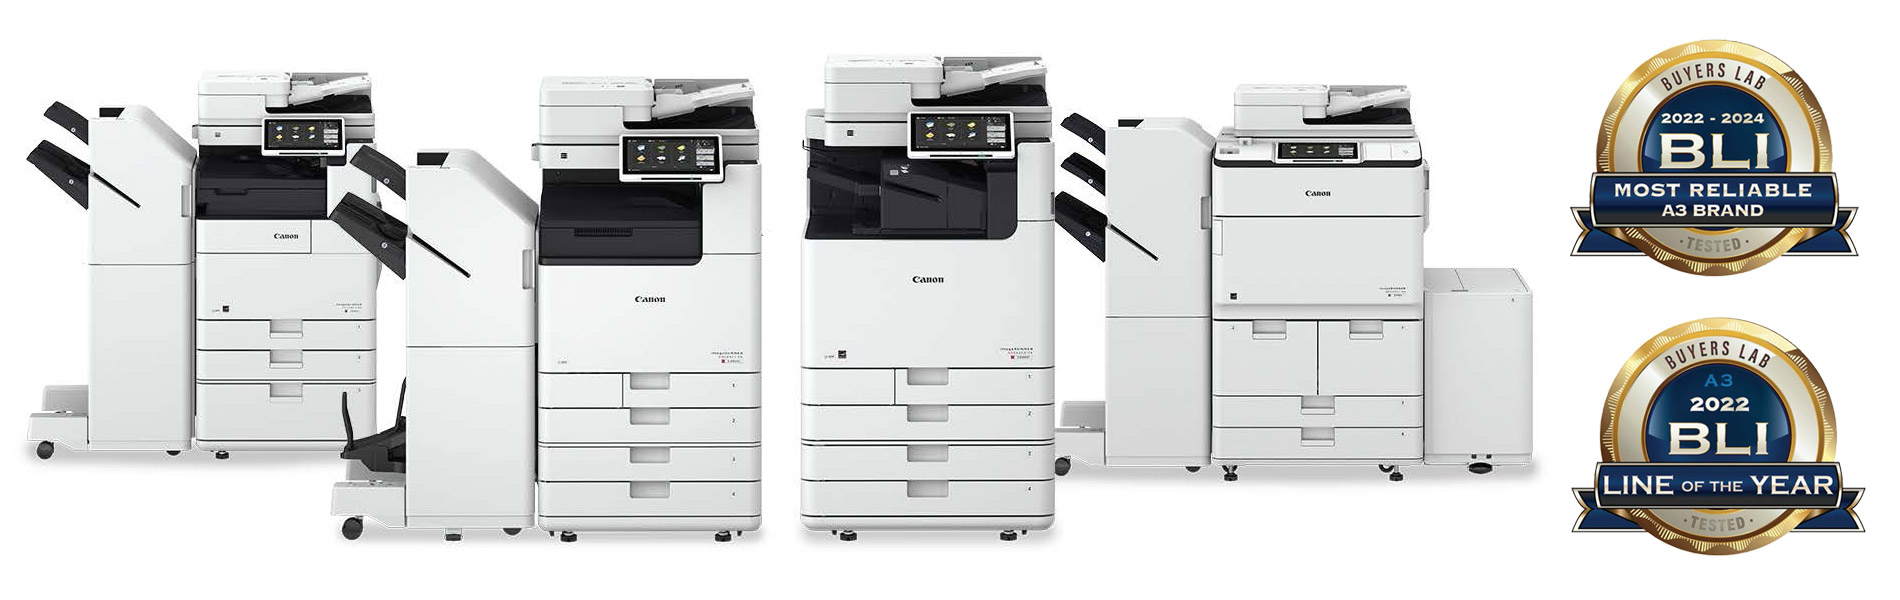 Image of imageRUNNER ADVANCE multifunction printers and copiers